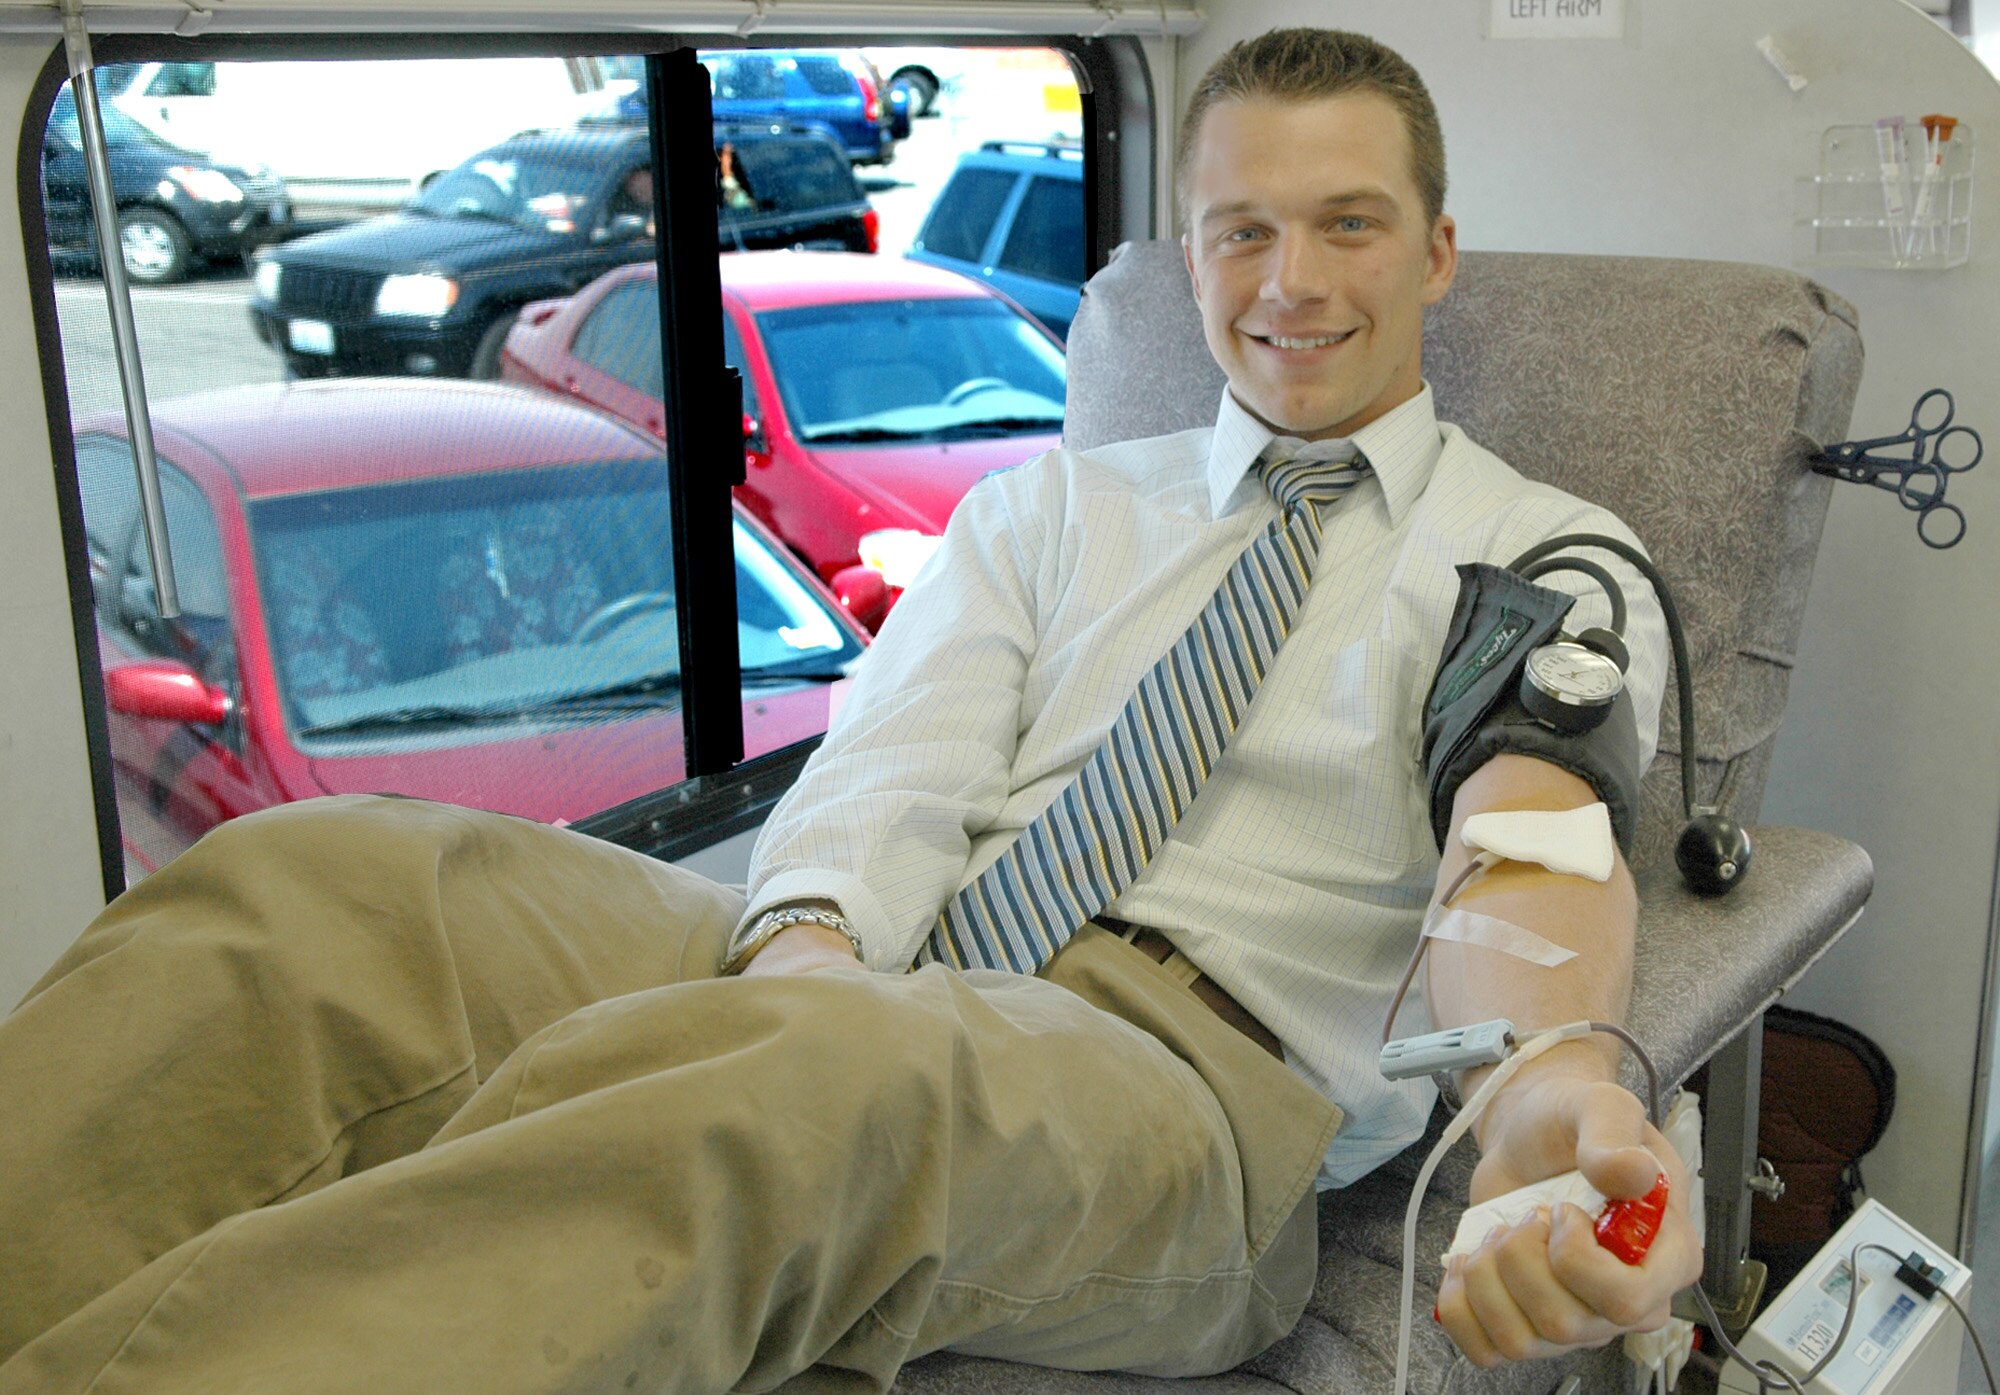 FAIRCHILD AIR FORCE BASE, Wash. -- Kurt Mabis, a legal intern at the 92nd Air Refueling Wing legal office, donates blood on the Inland Northwest Blood Center bus located in the Base Exchange parking lot. Mr. Mabis has been donating for approximately nine years. “I donate because my brother needed surgery and he used someone else’s donated blood. So, I think of it as paying those people back.” Donors received a free T-shirt for their donation. (U.S. Air Force photo / Airman 1st Class Kali L. Gradishar)